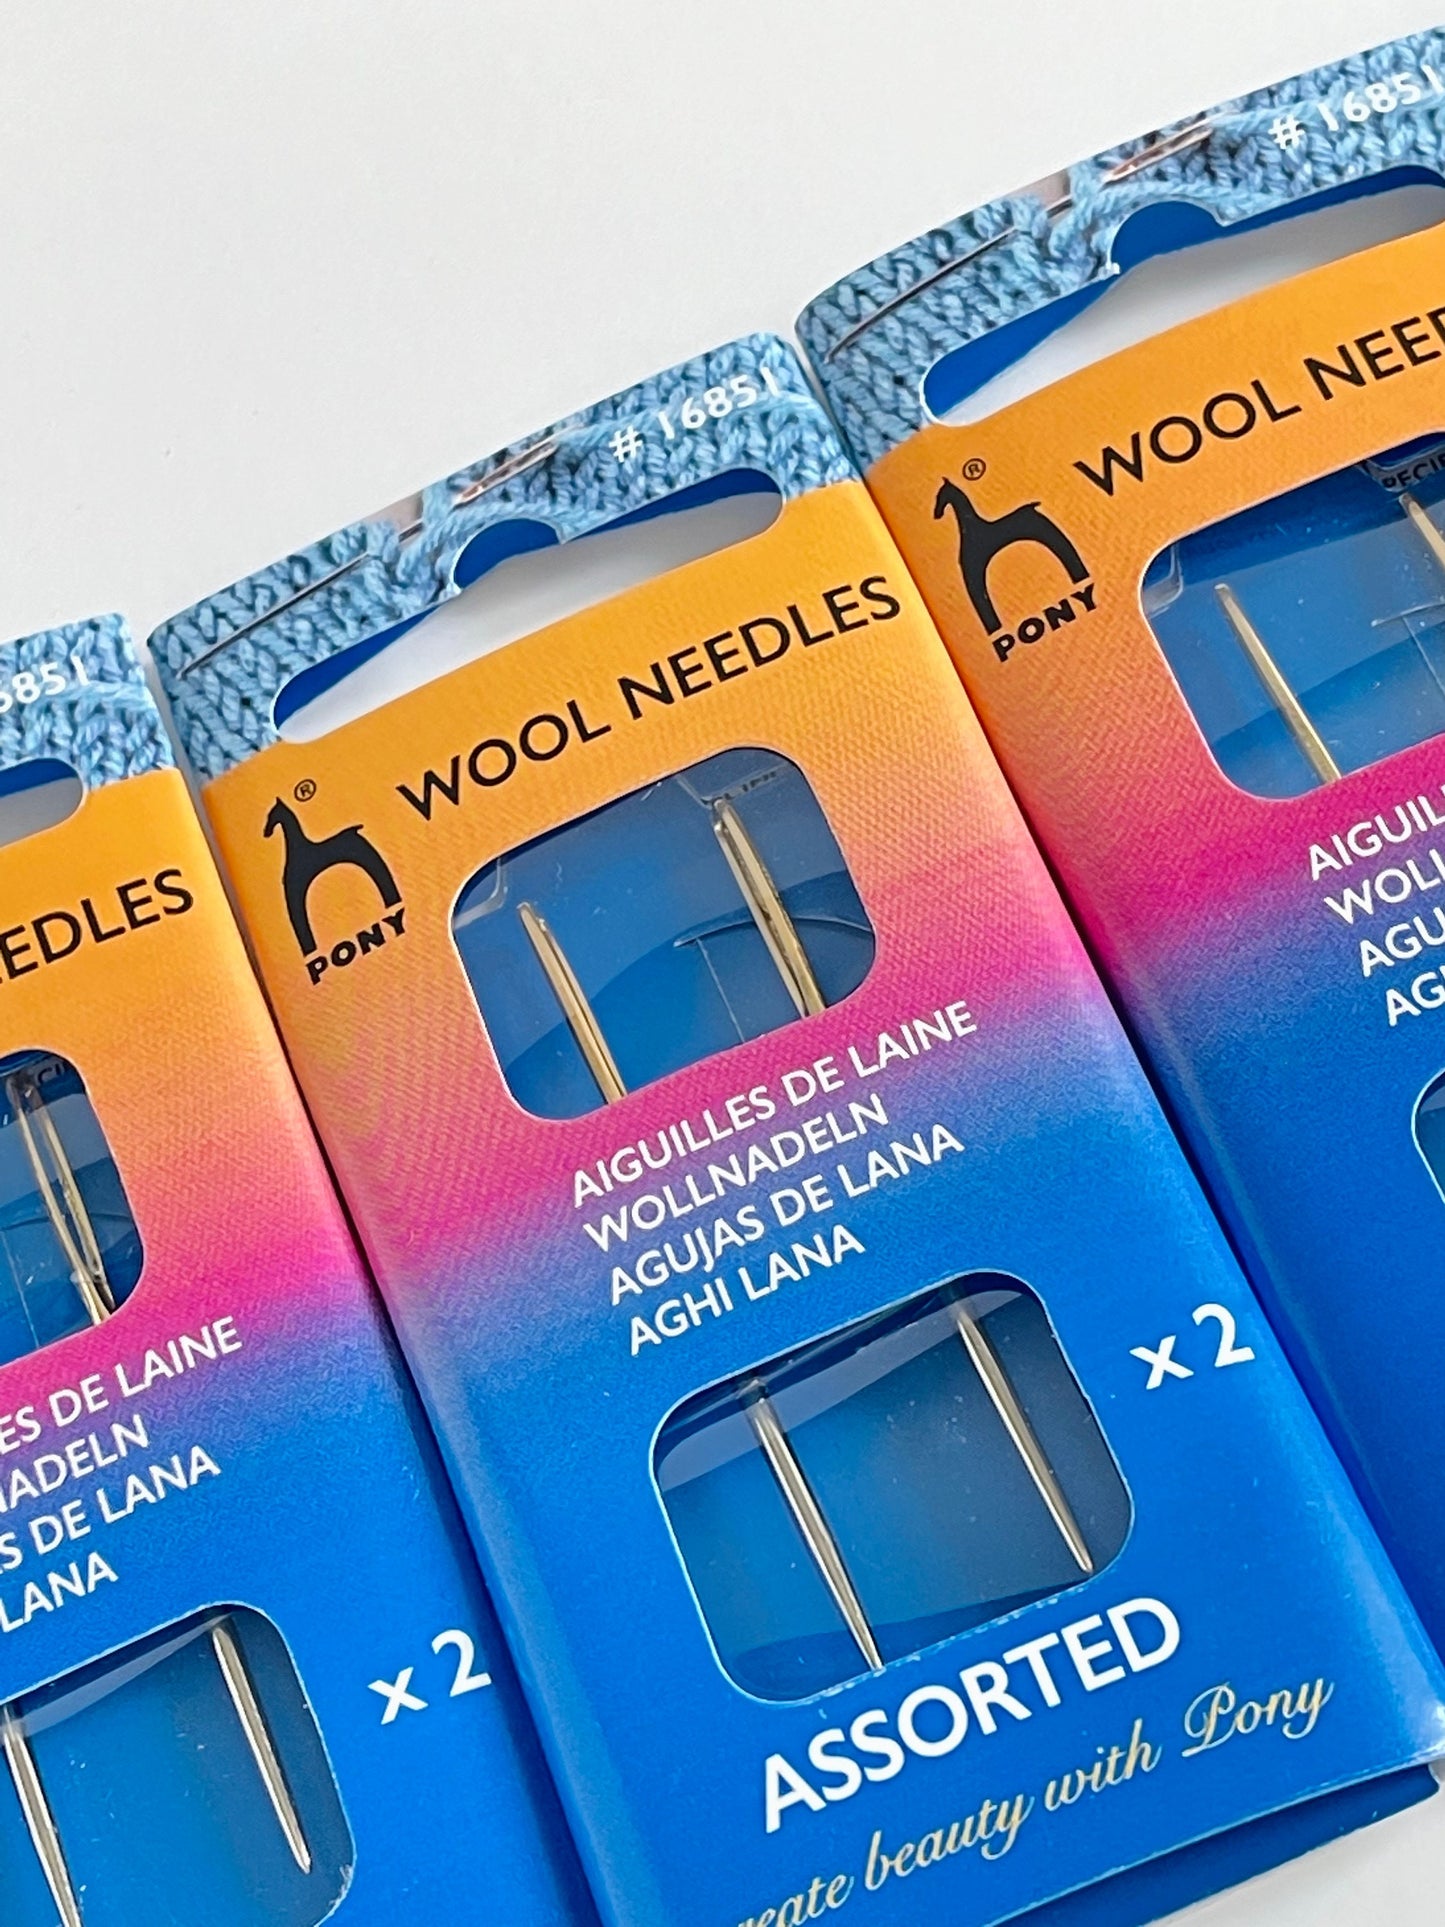 Wool sewing needles by Pony